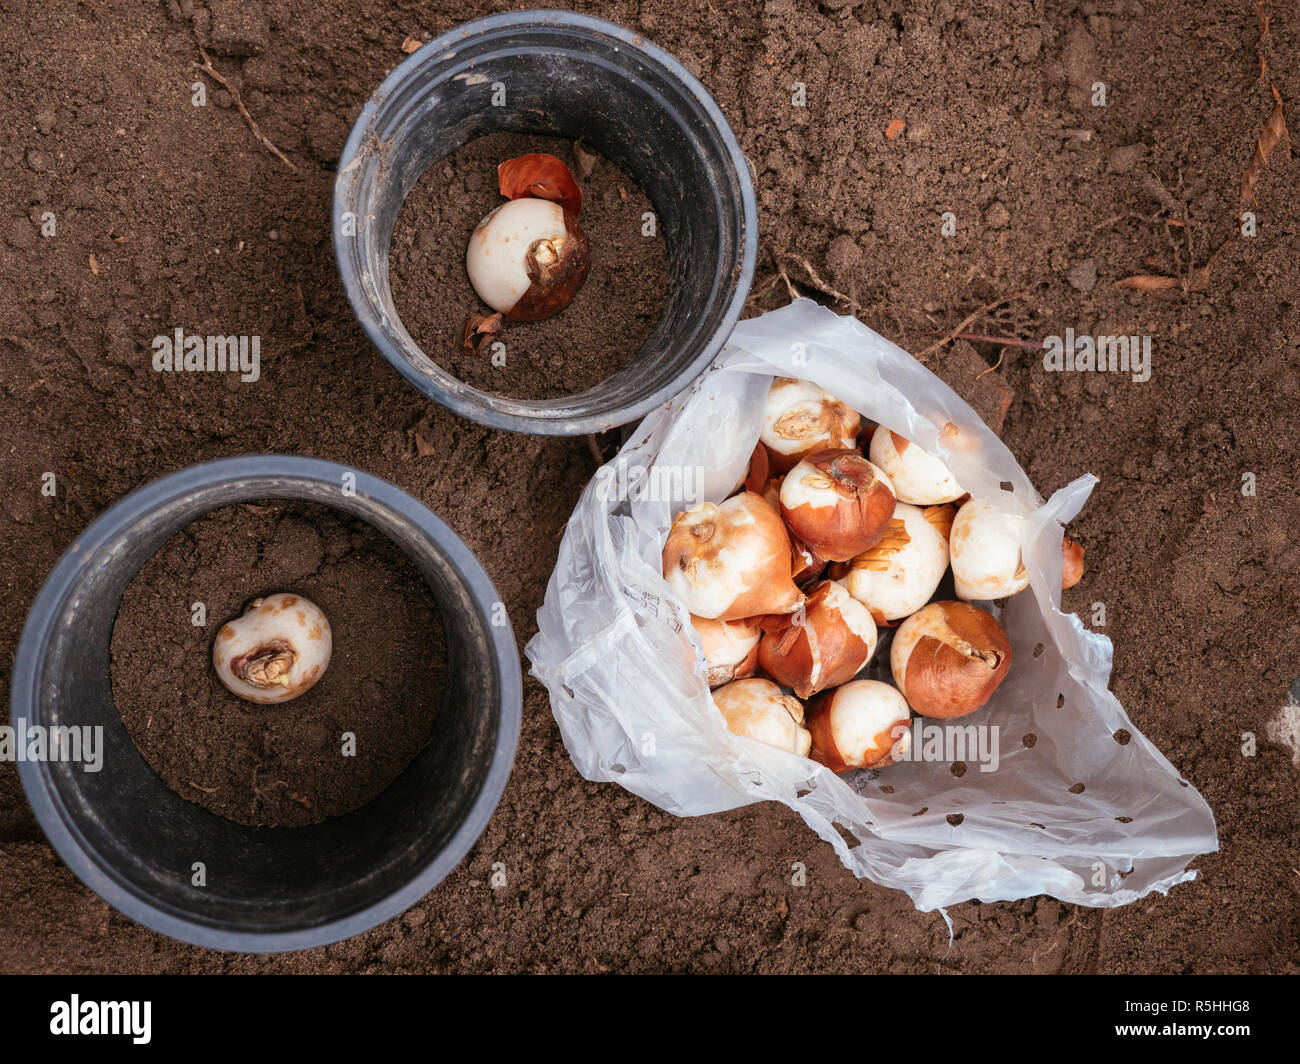 Tulip bulbs being planted in plastic pots to protect them against rodents. Stock Photo